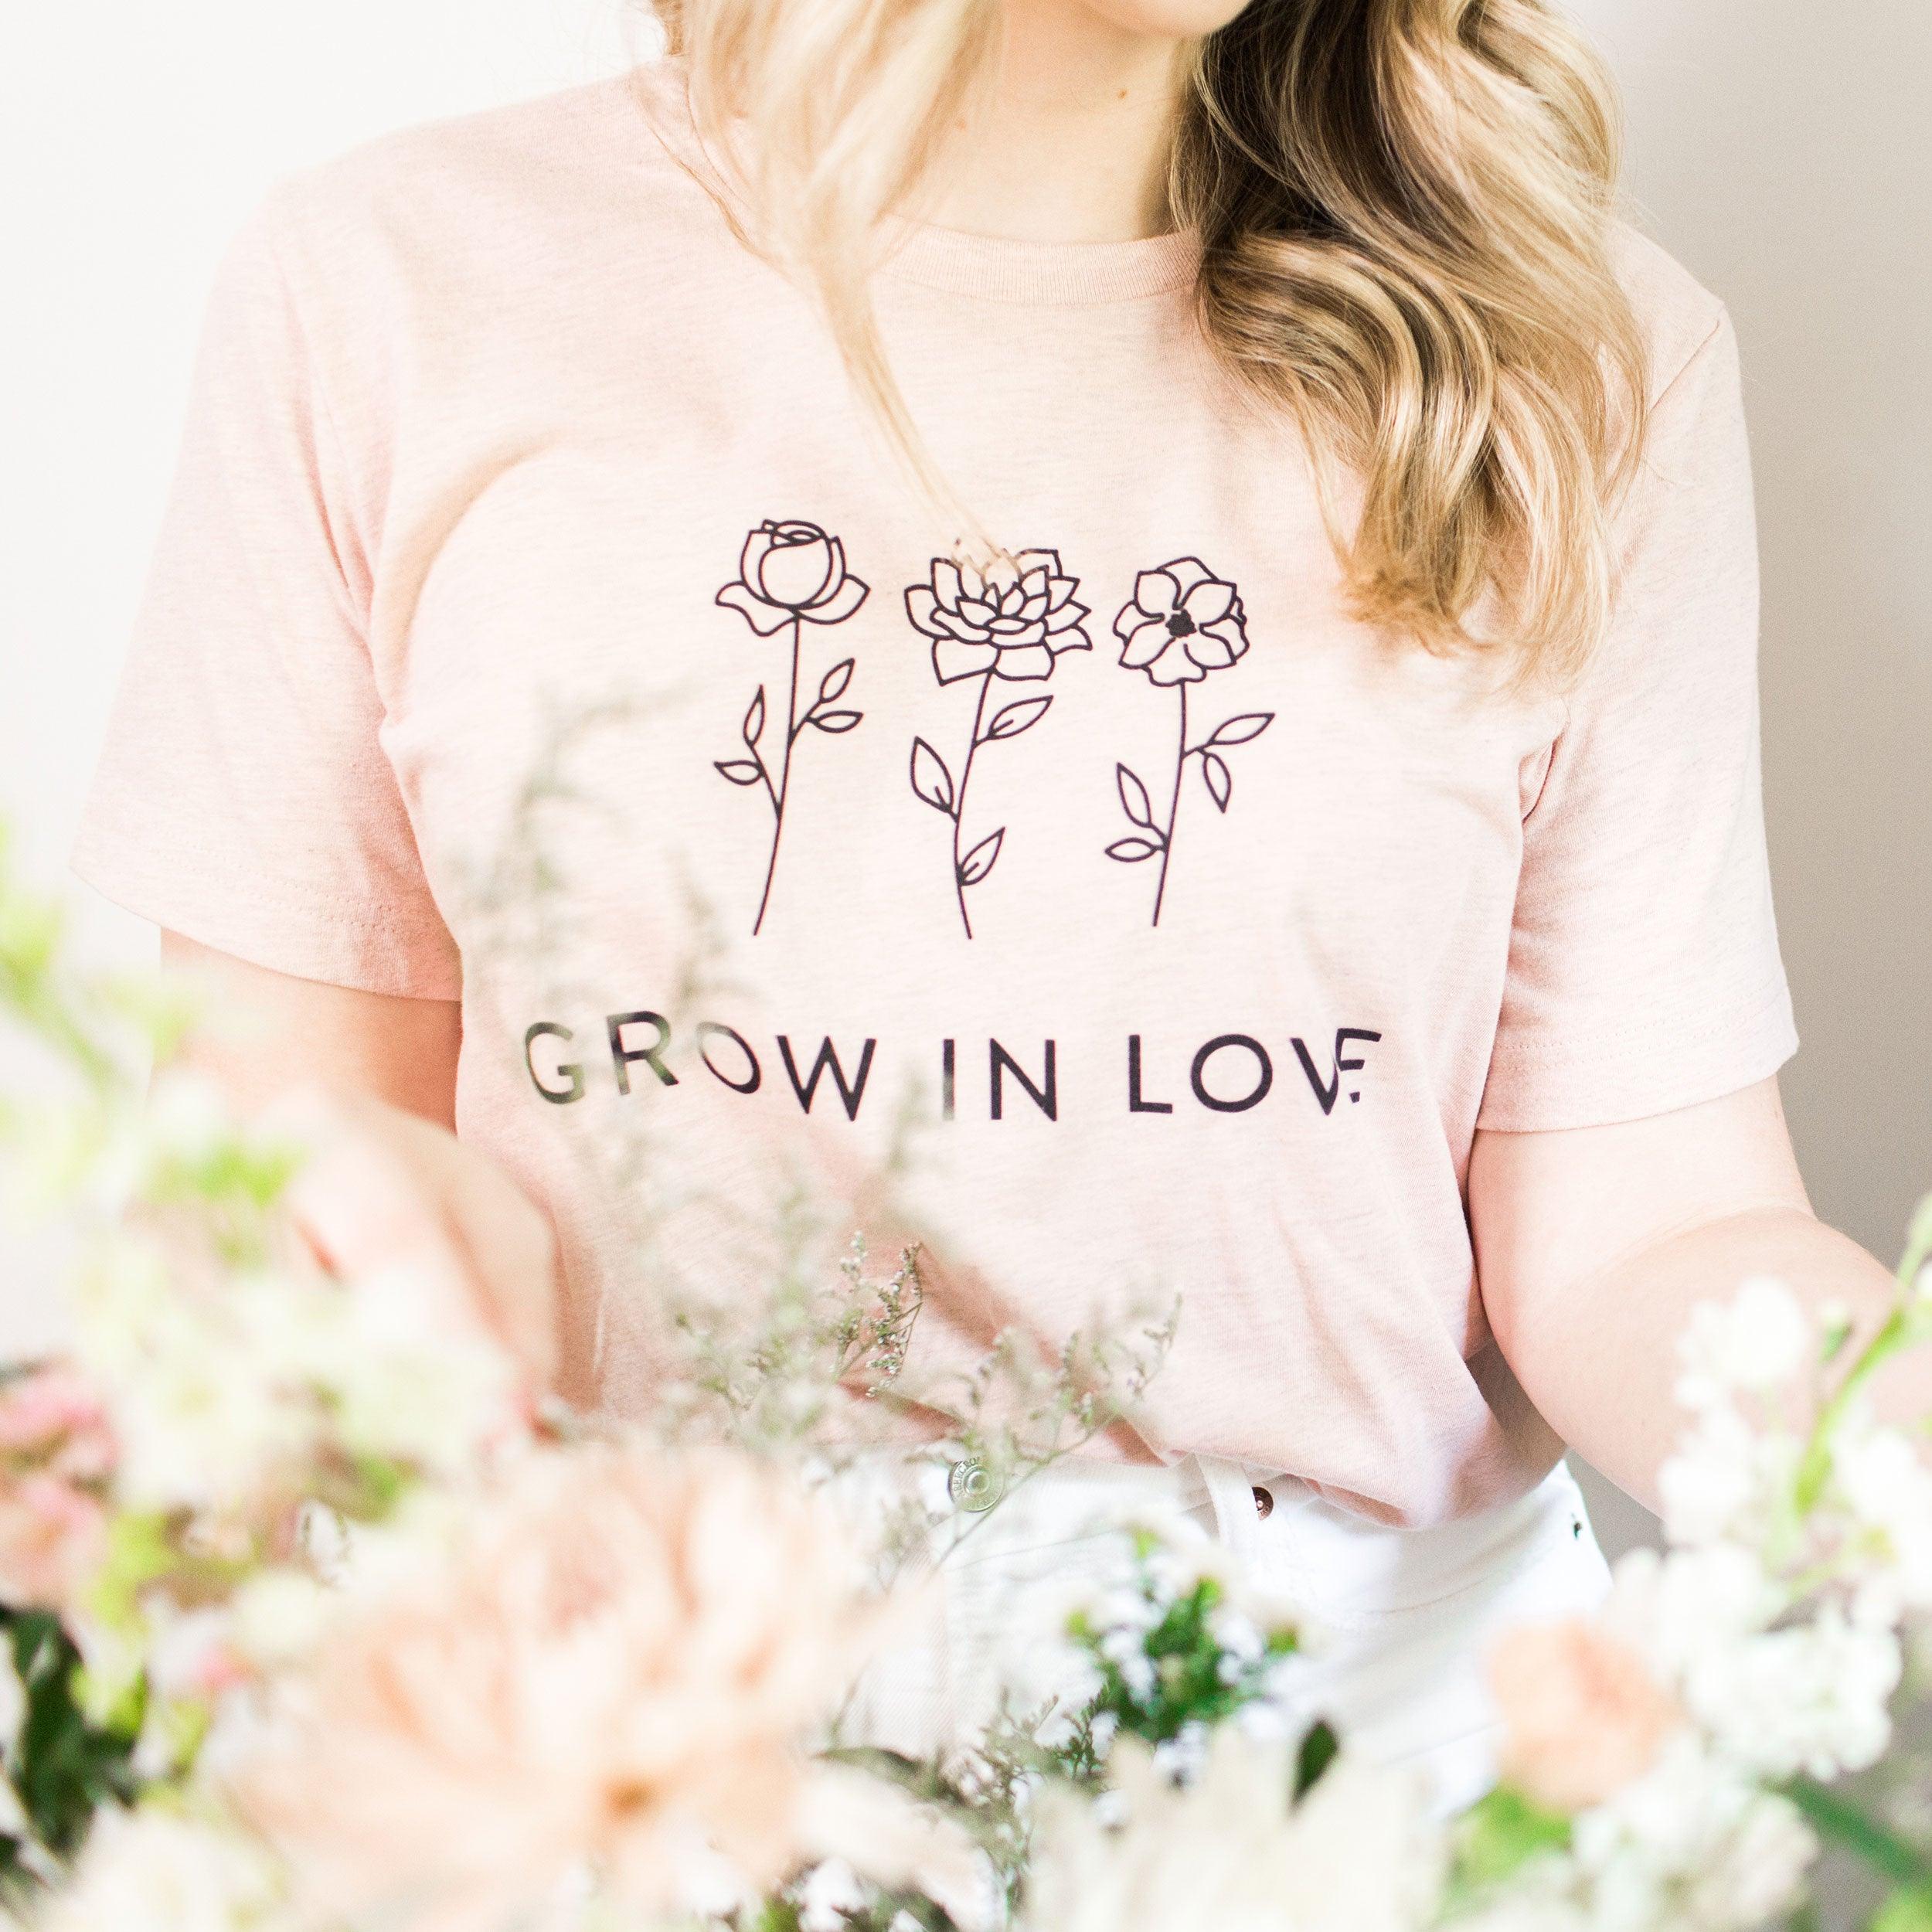 Florist Tees, Shirts, Swag and thank you gifts from Oaklynn Lane